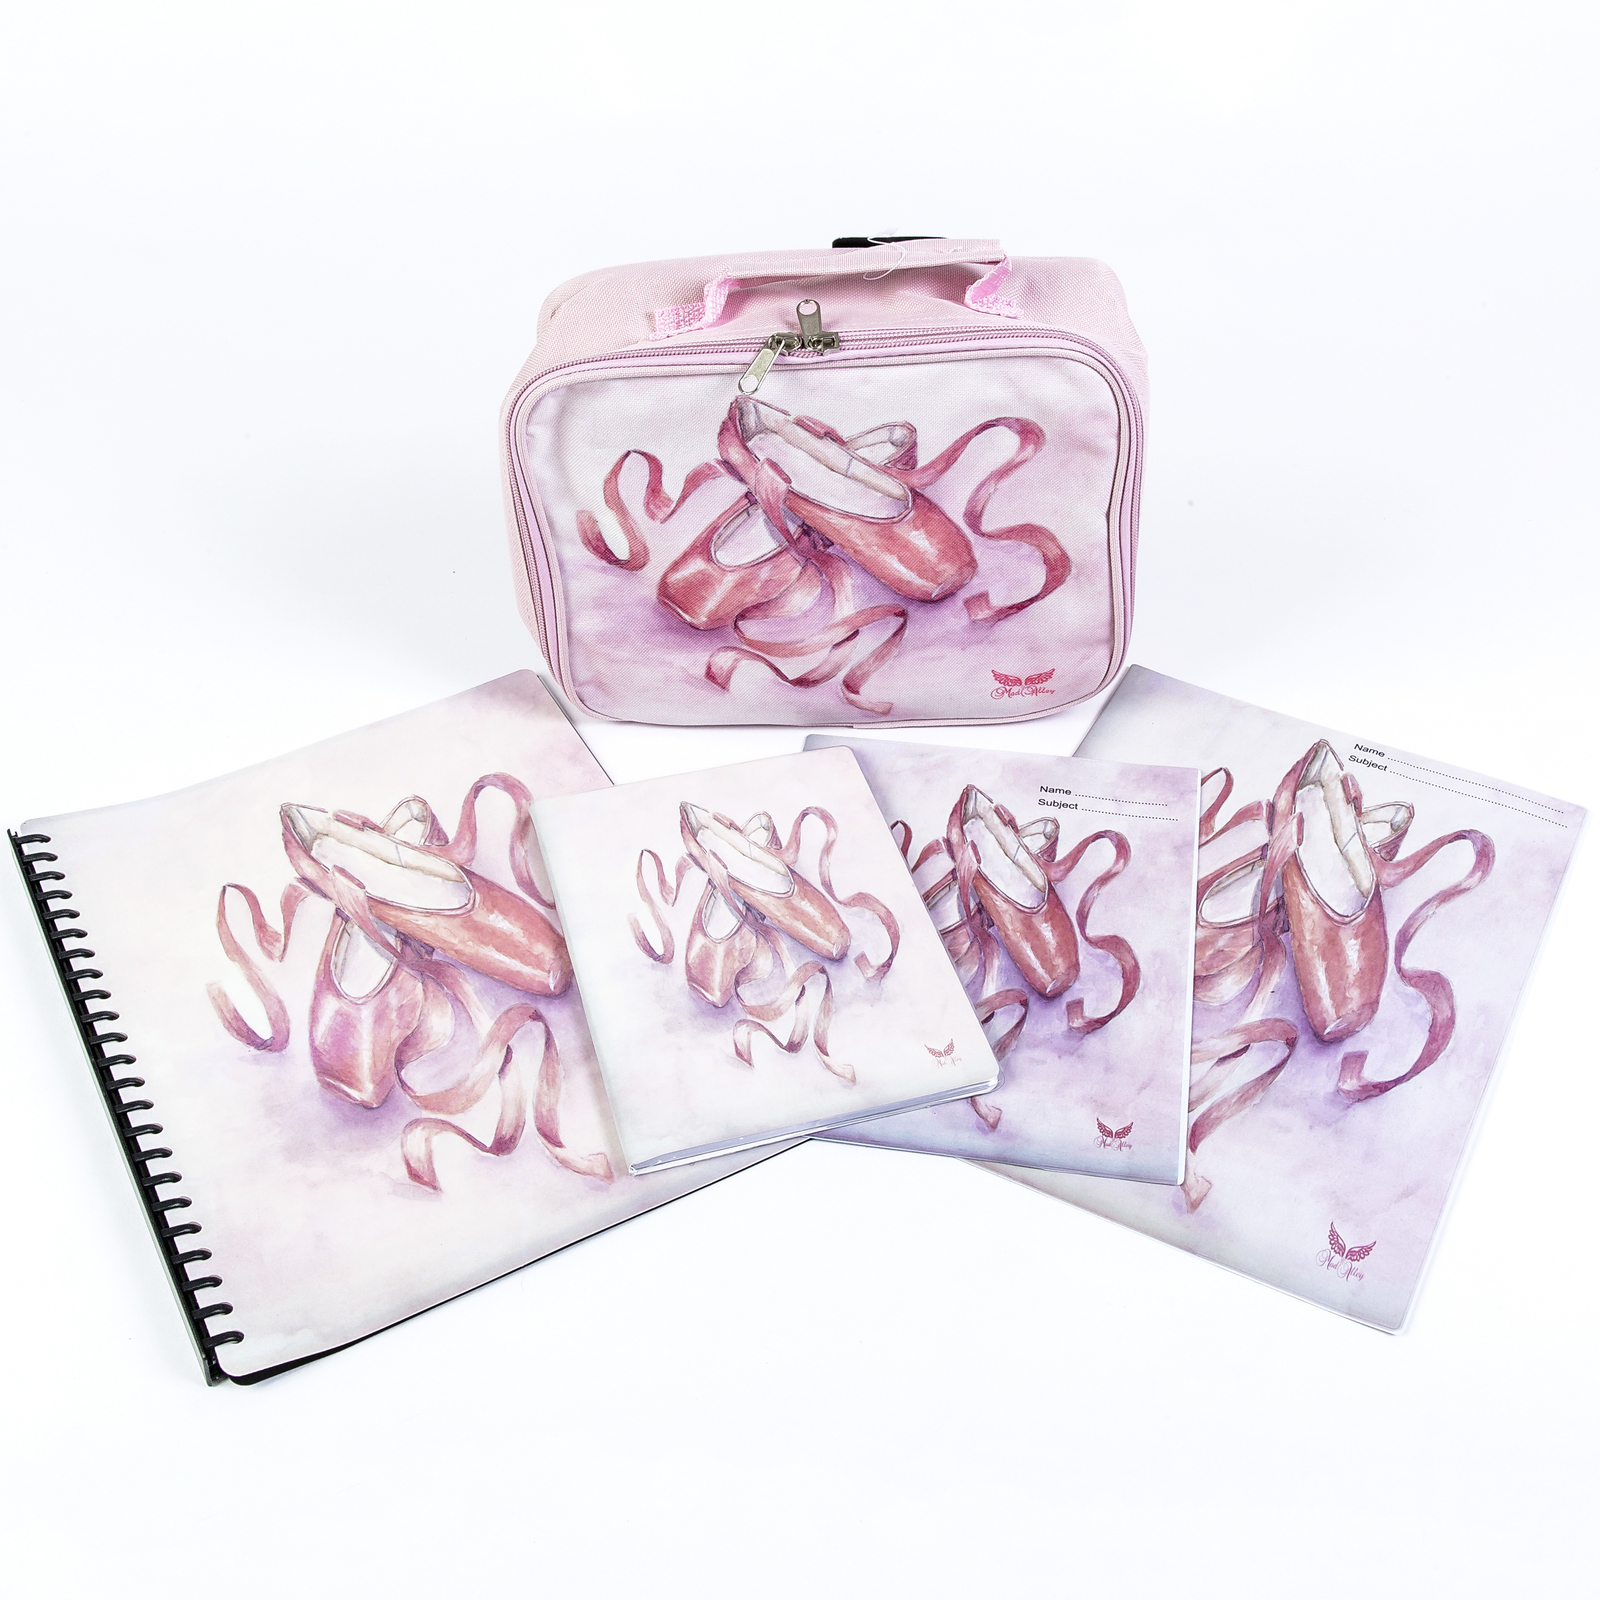 Mad Ally Pointe Shoe Lunch Box